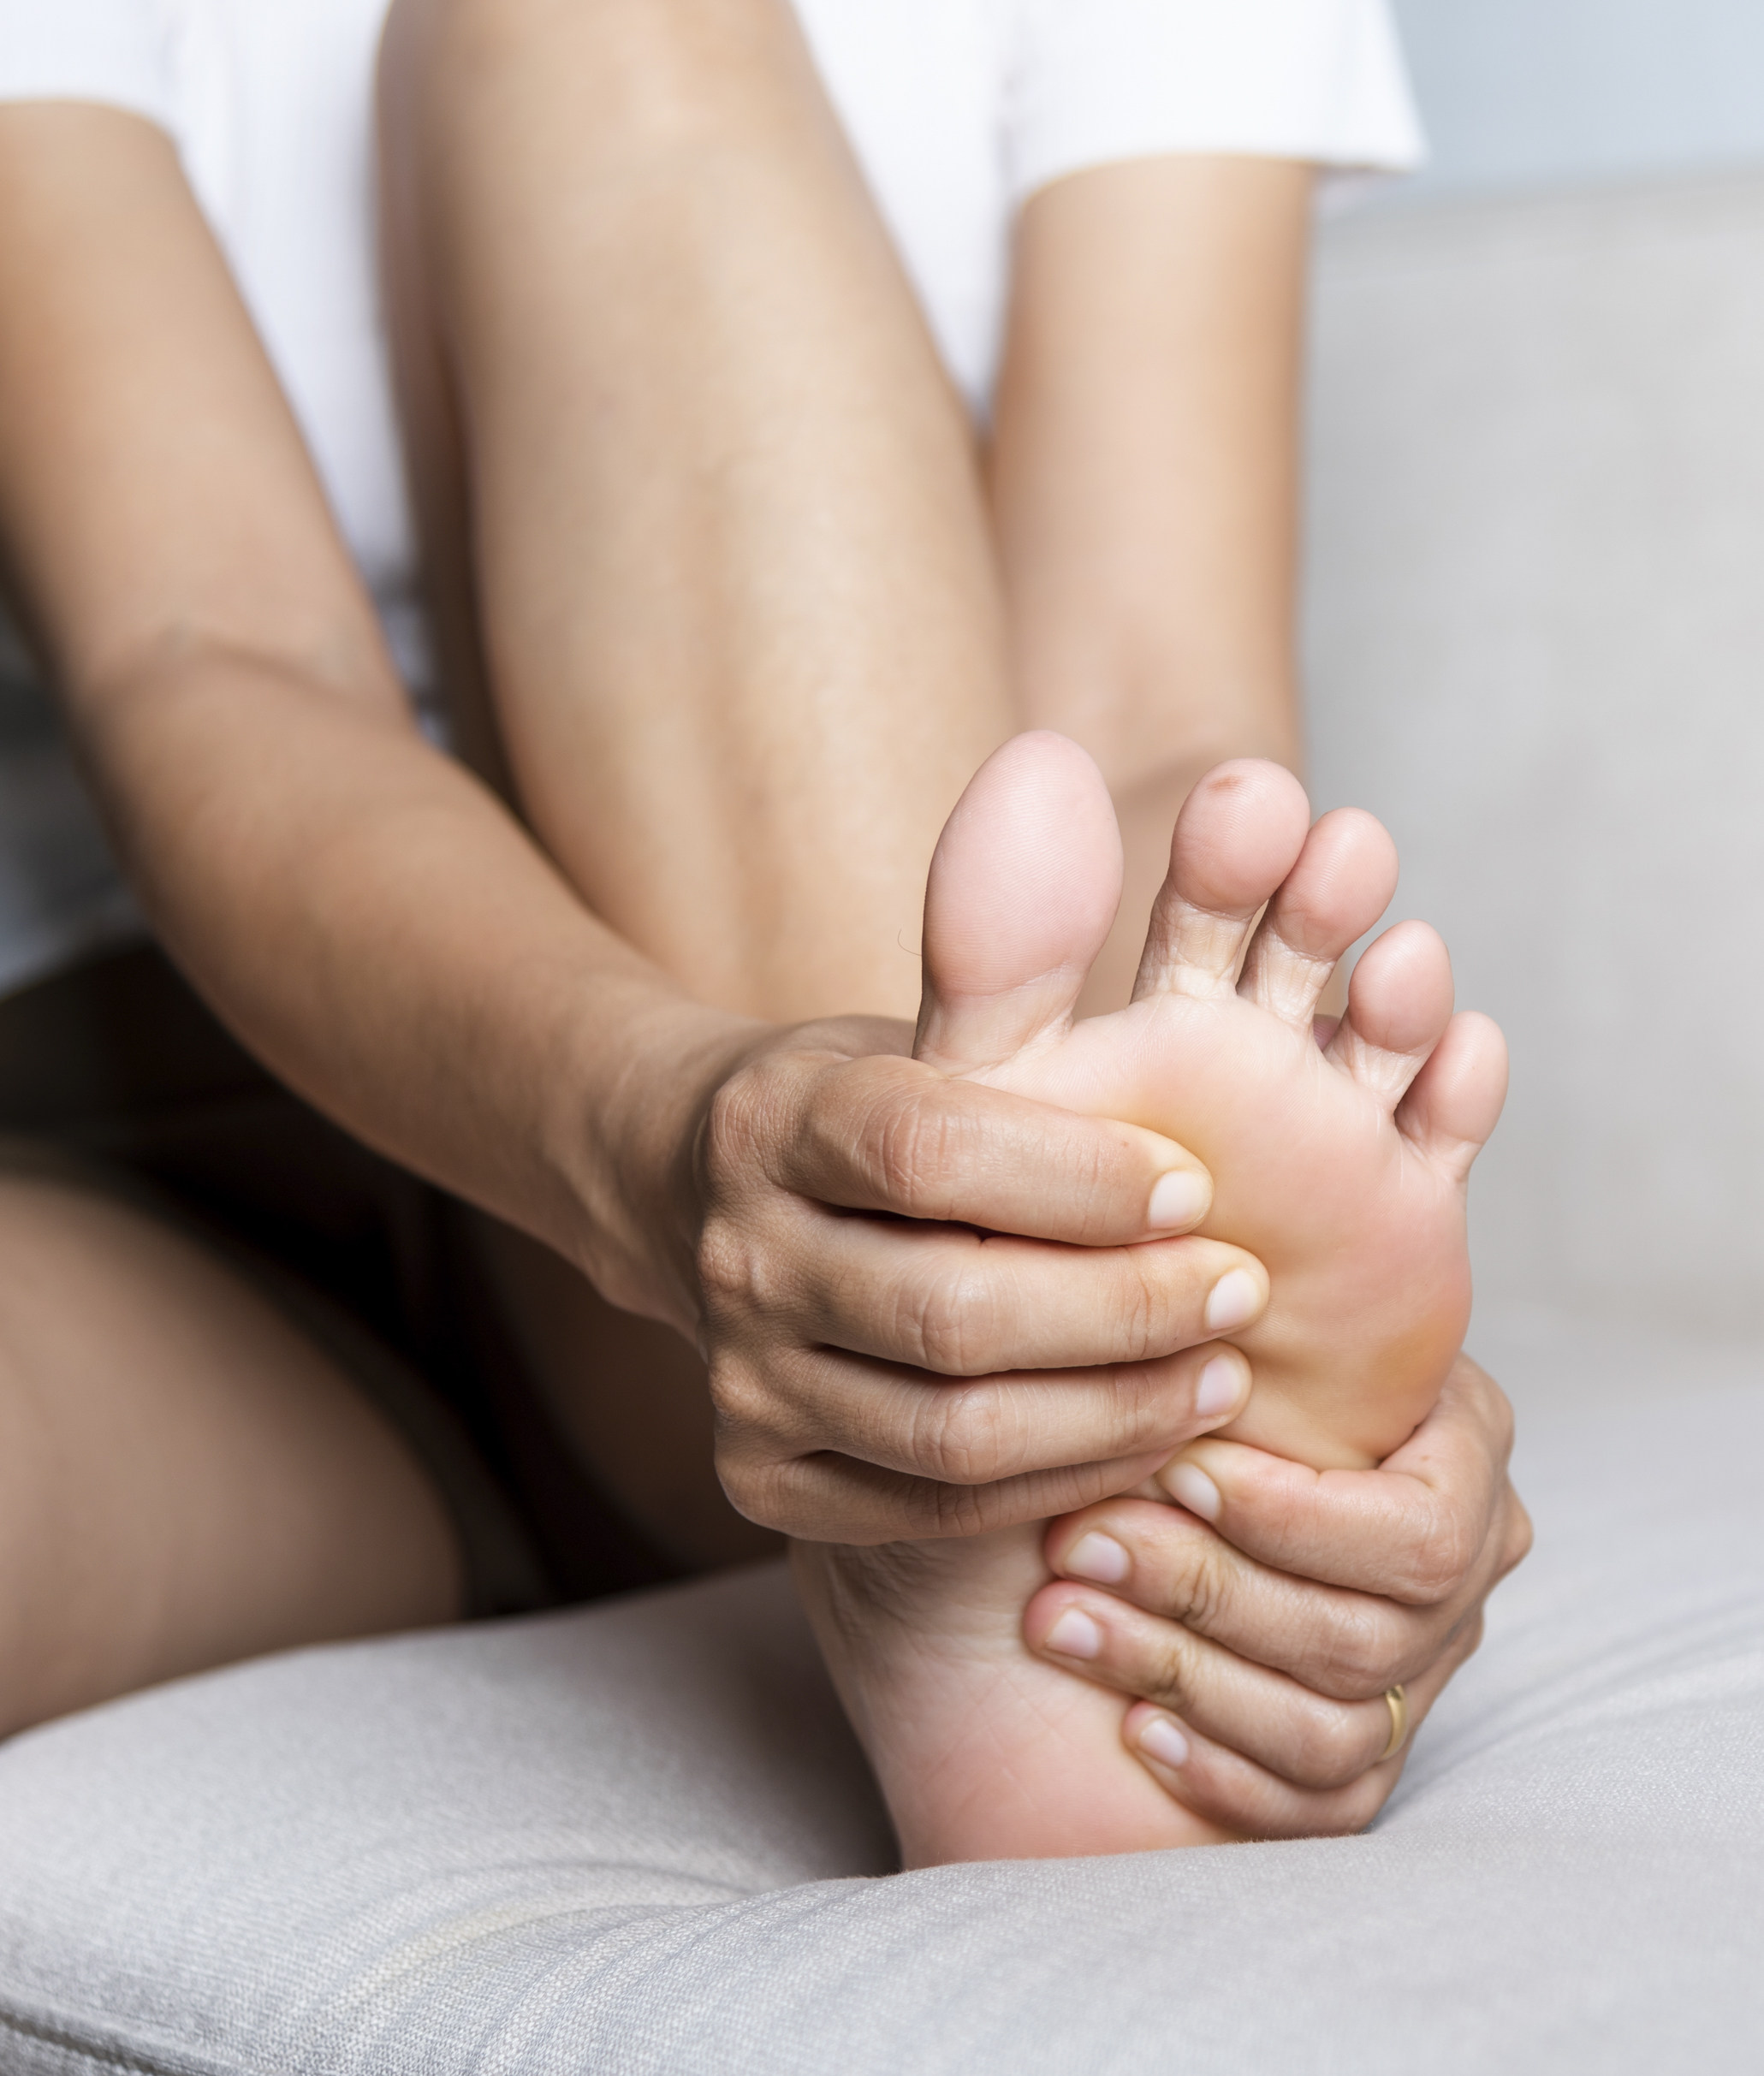 Our feet are prone to overuse injuries such as plantar fasciitis and stress fractures, and our foot shape and the shoes we wear can make these conditions worse, a podiatrist explains. Photo: Shutterstock